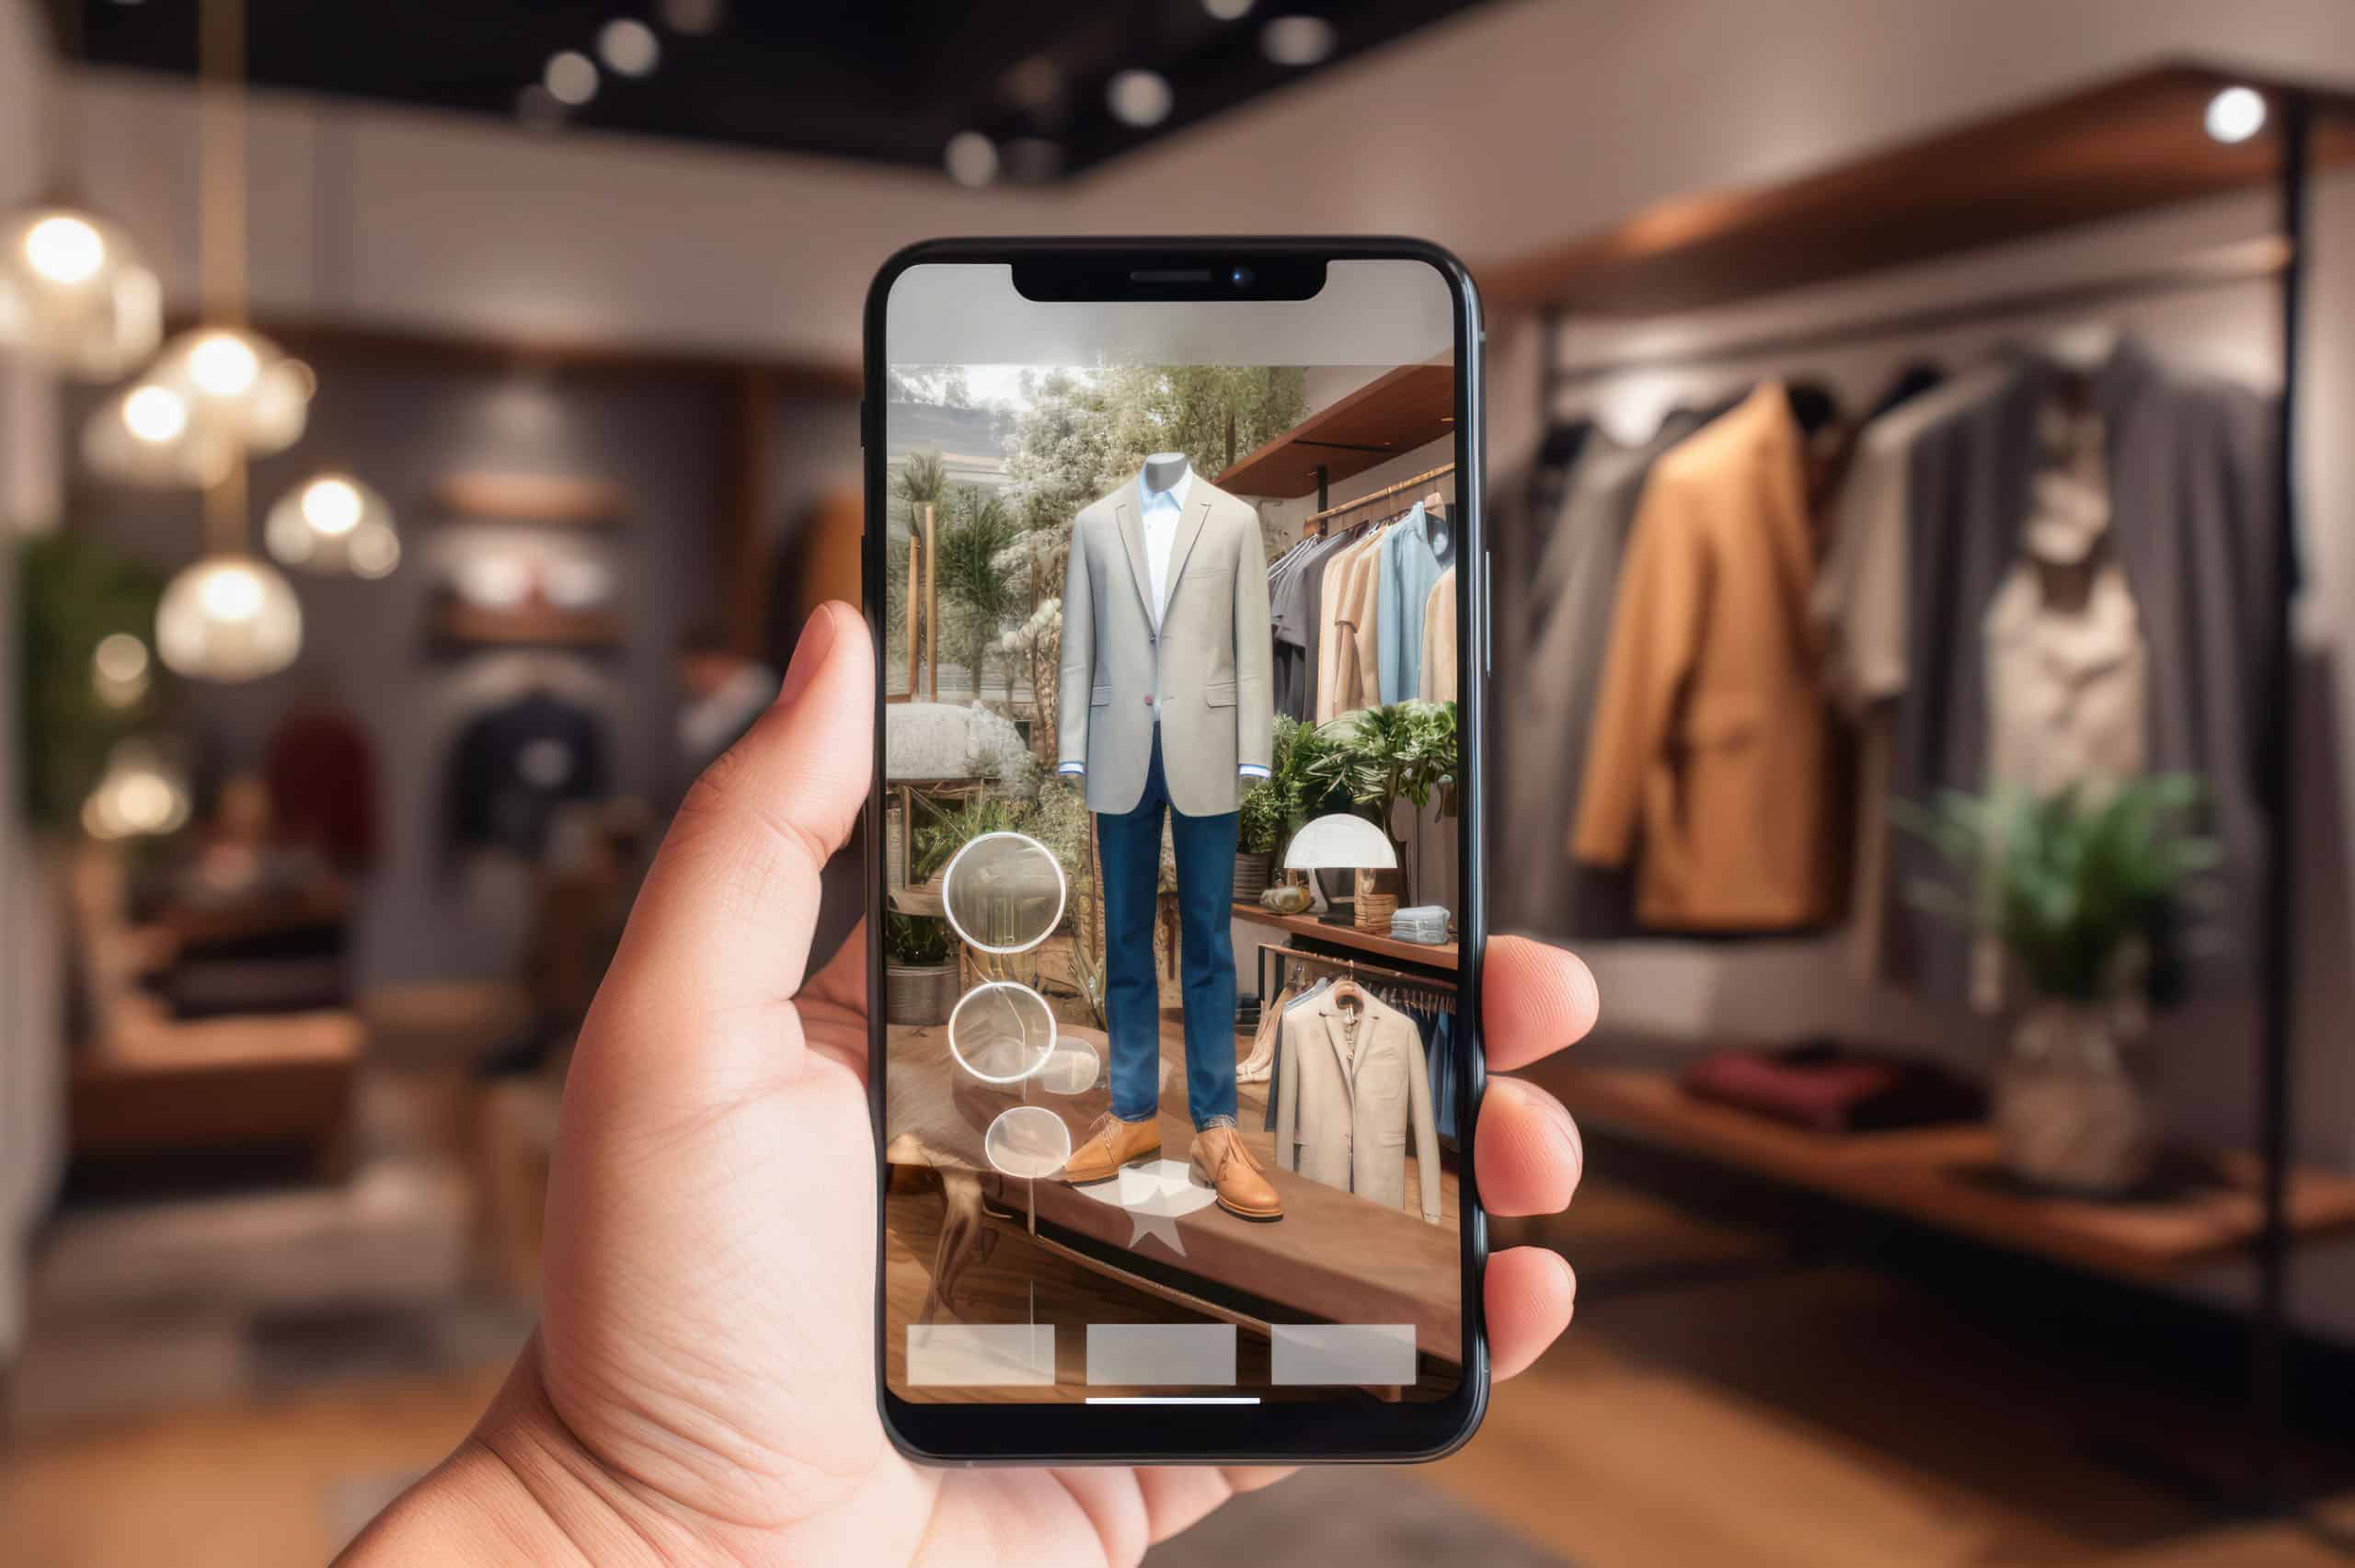 A customer is holding up a smartphone in a clothing store, enhancing their customer experience.